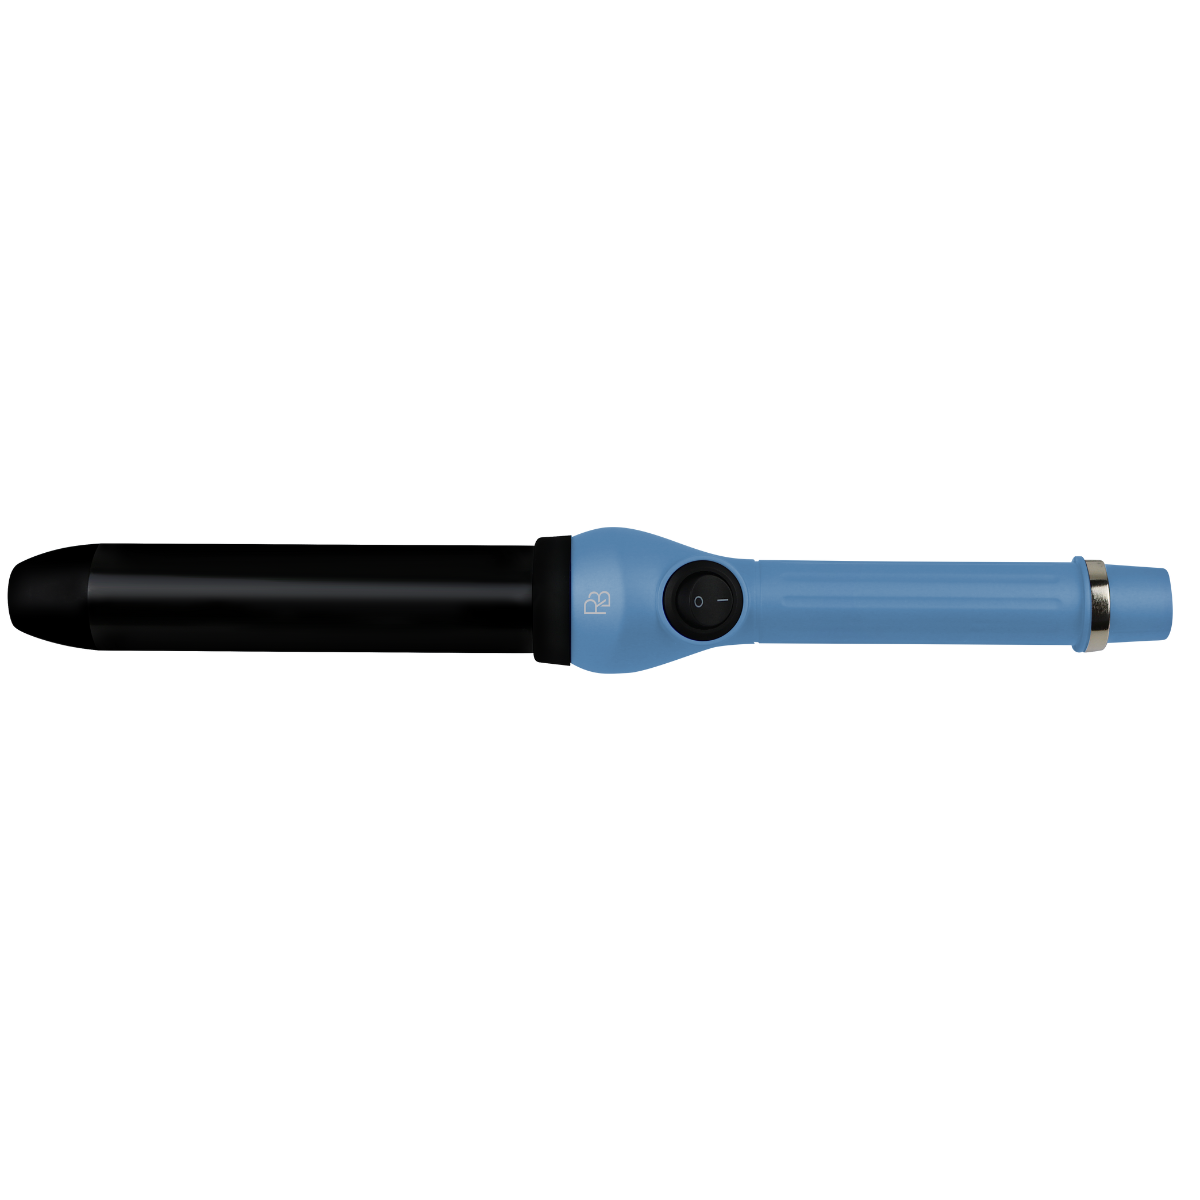 Viva Curl Pro Clipless Curling Wand - 32mm